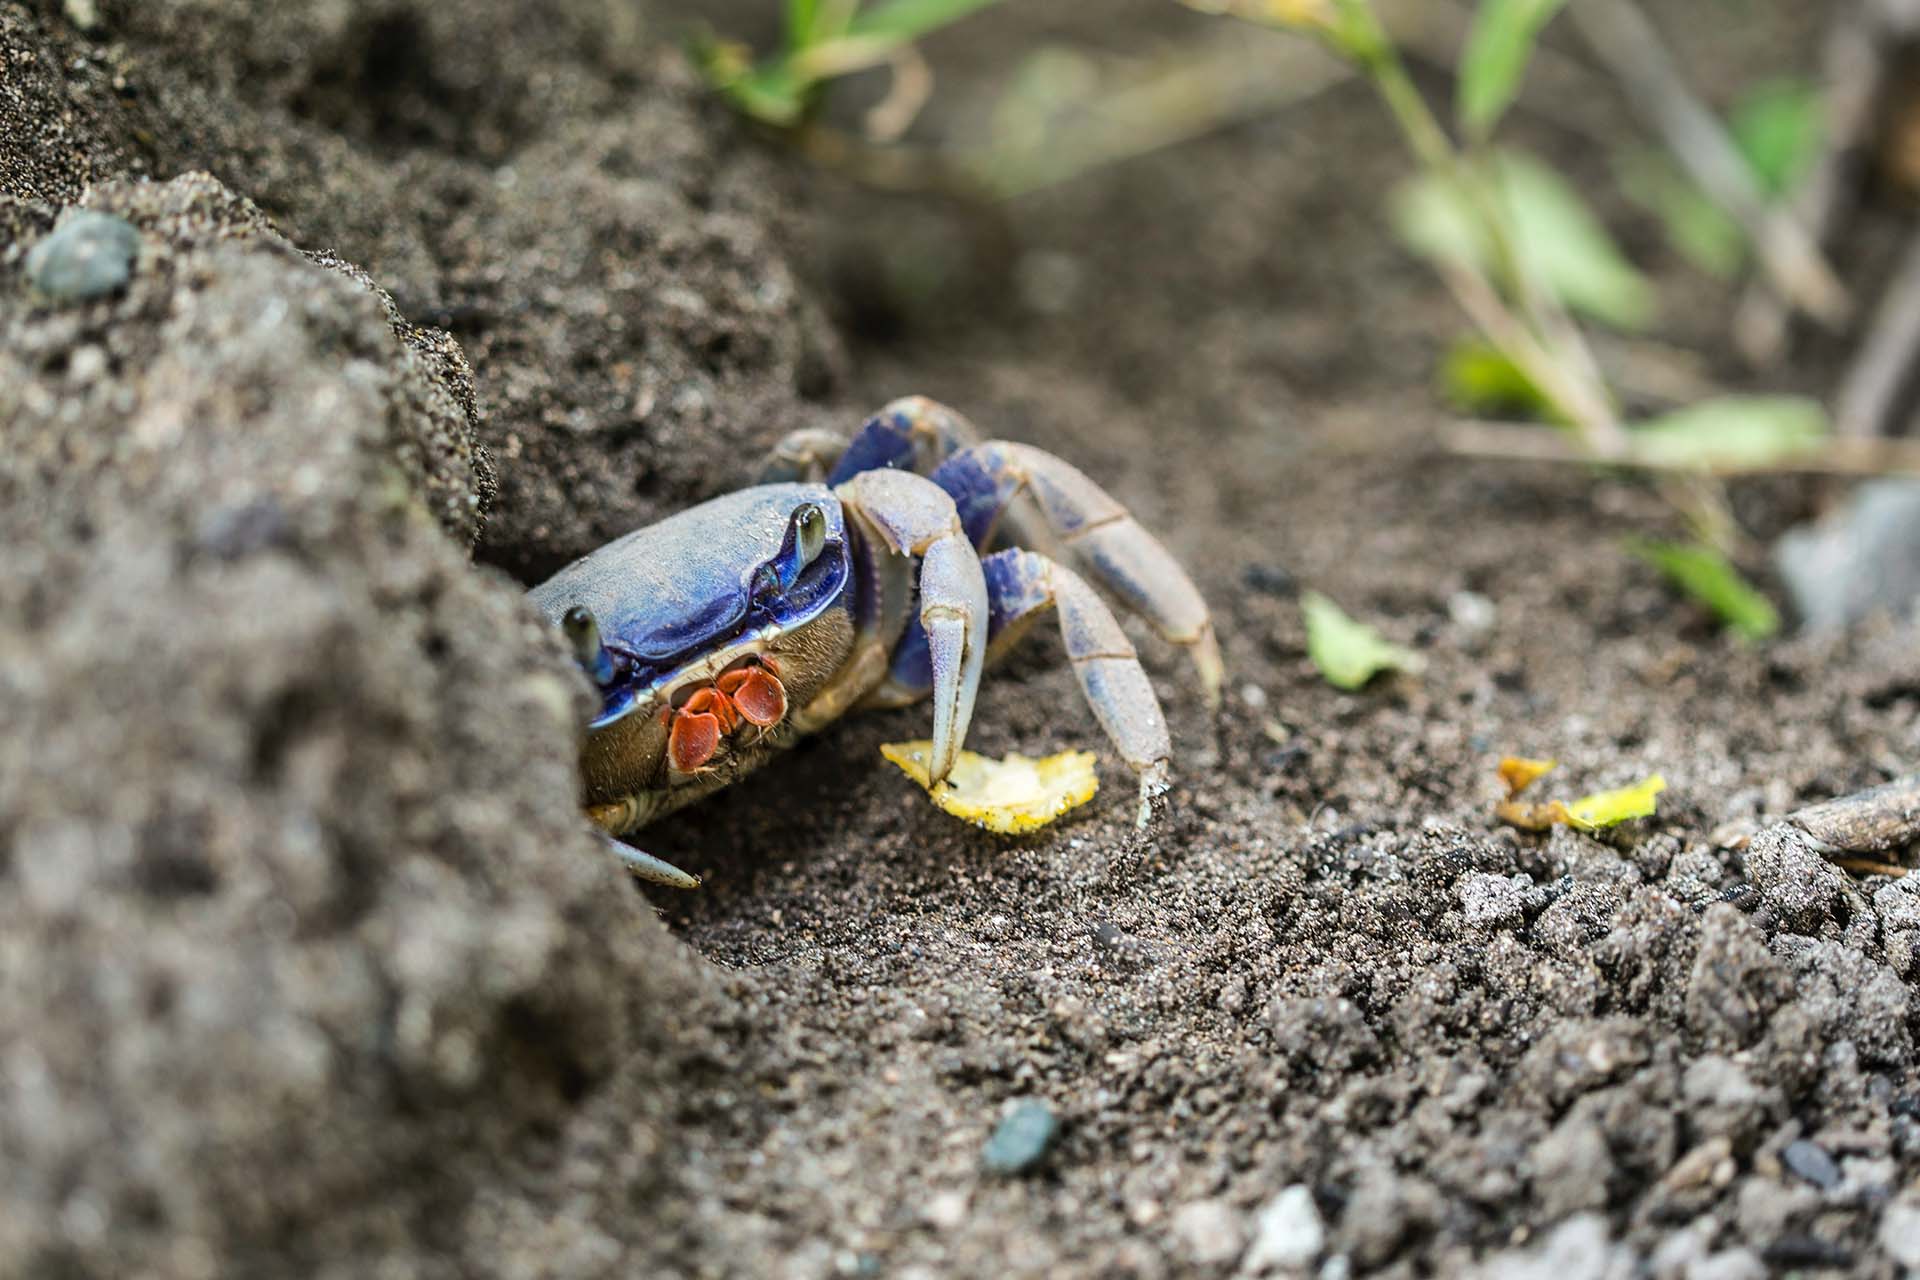 A blue crab in nature 